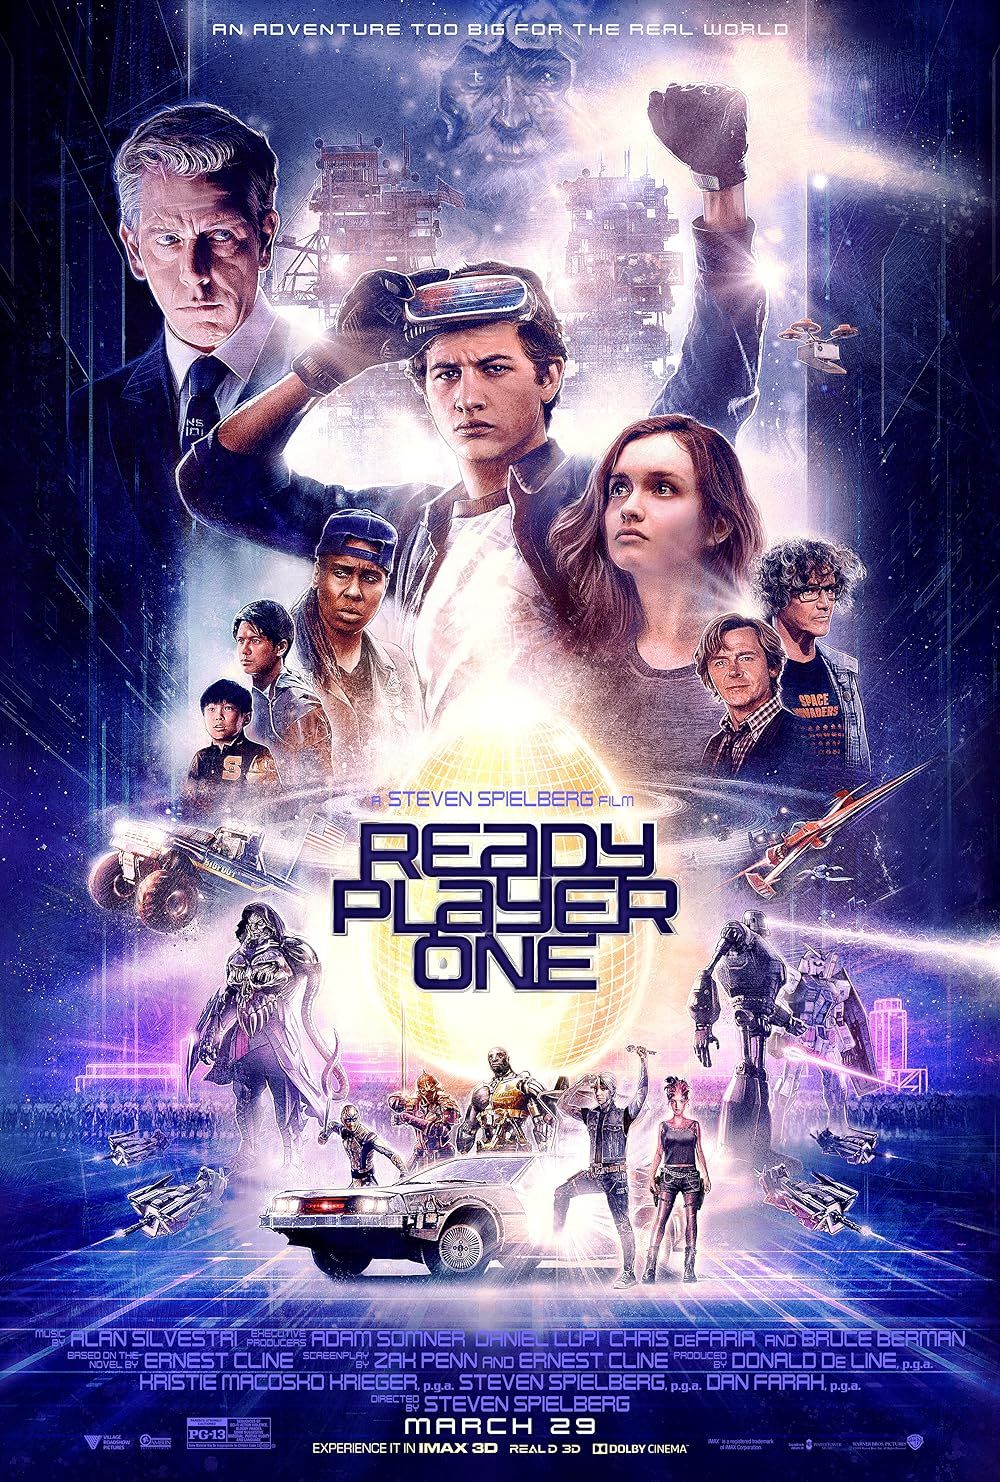 Poster of Ready Player One with all the characters in different positions